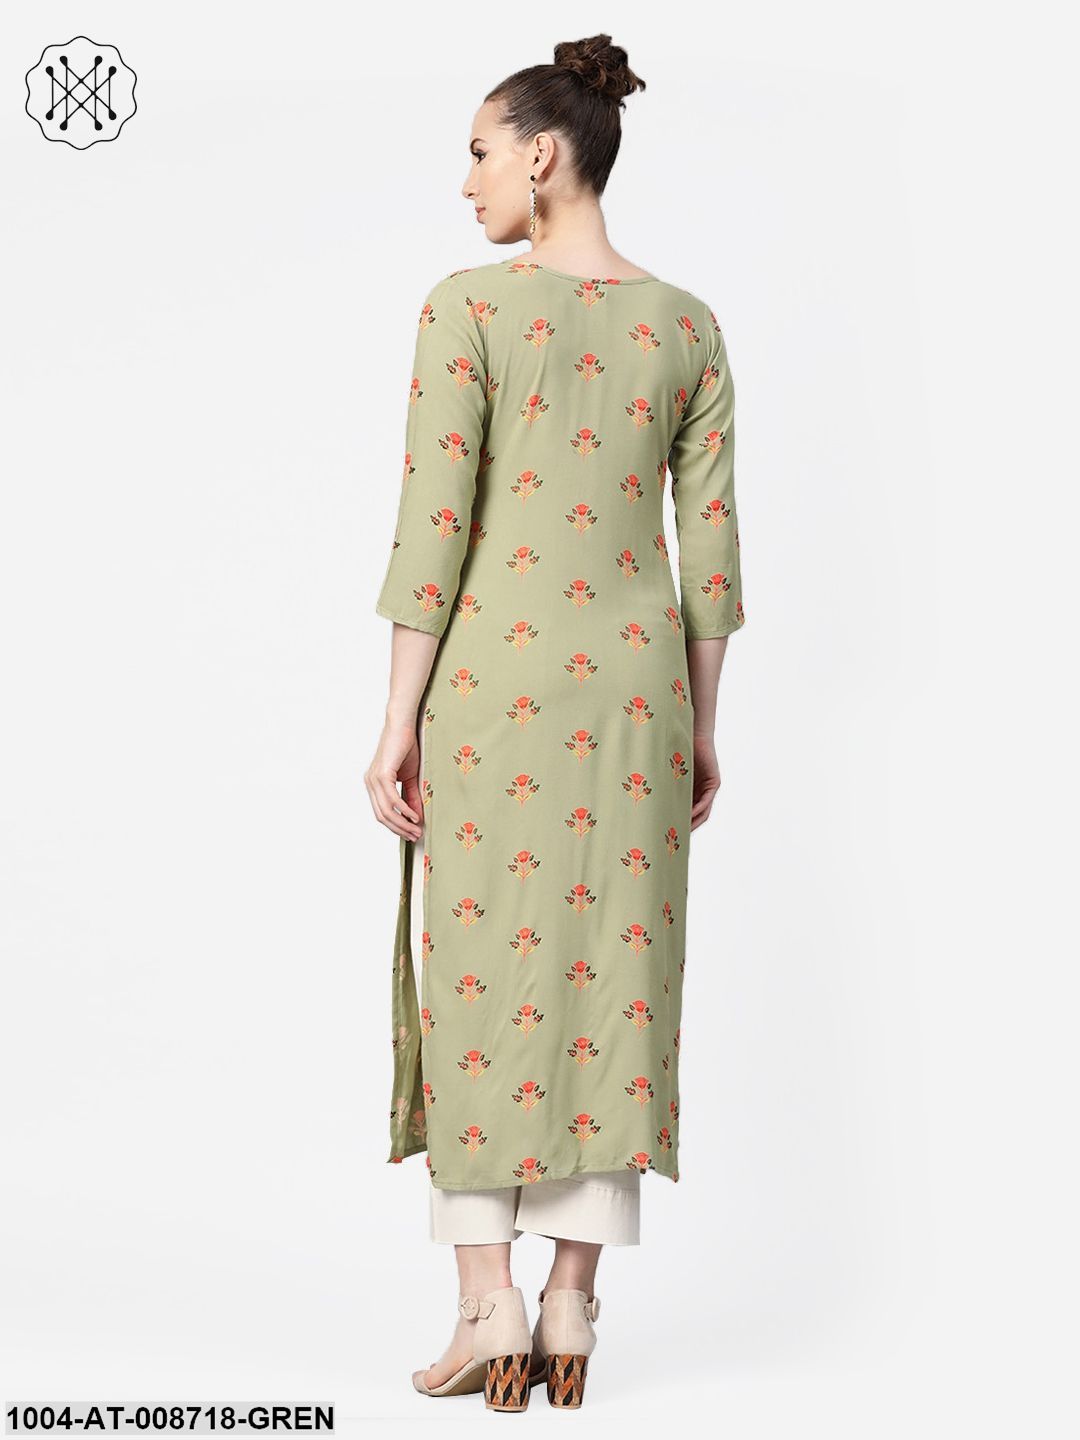 Olive green Multi Coloured Printed Kurta with Round Neck with V & 3/4 sleeves